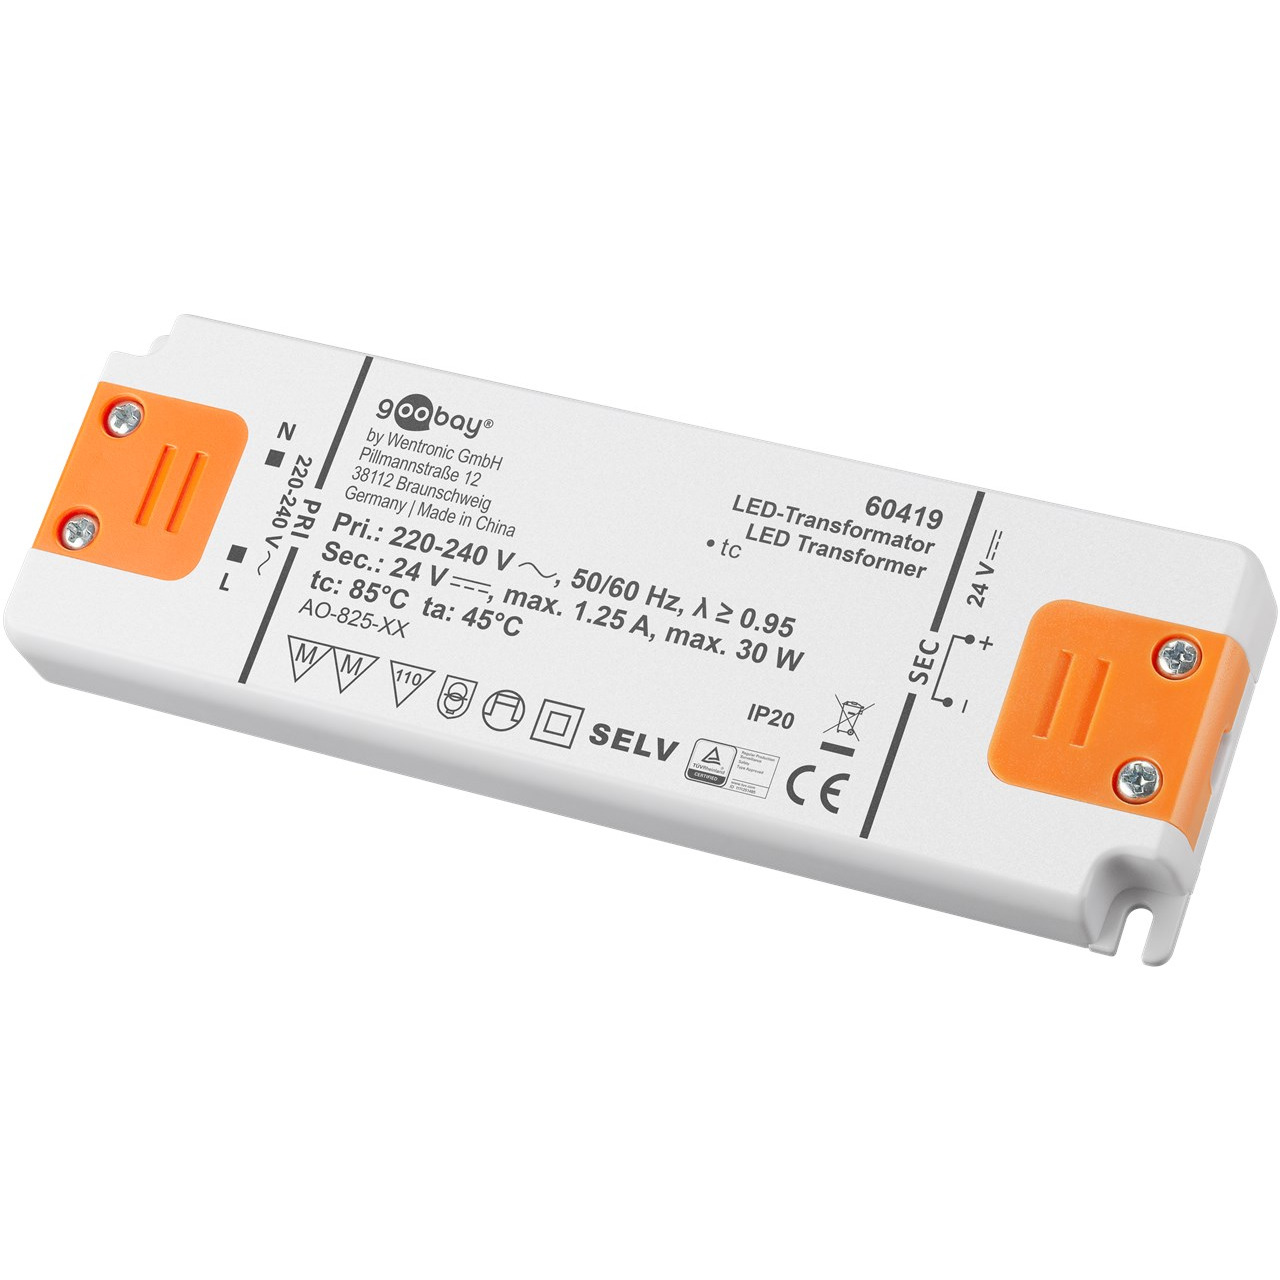 goobay LED-Netzteil - LED-Trafo- 30 W- 24 V DC- 1-25 A- Konstantspannung- IP20- ultraflach unter Beleuchtung